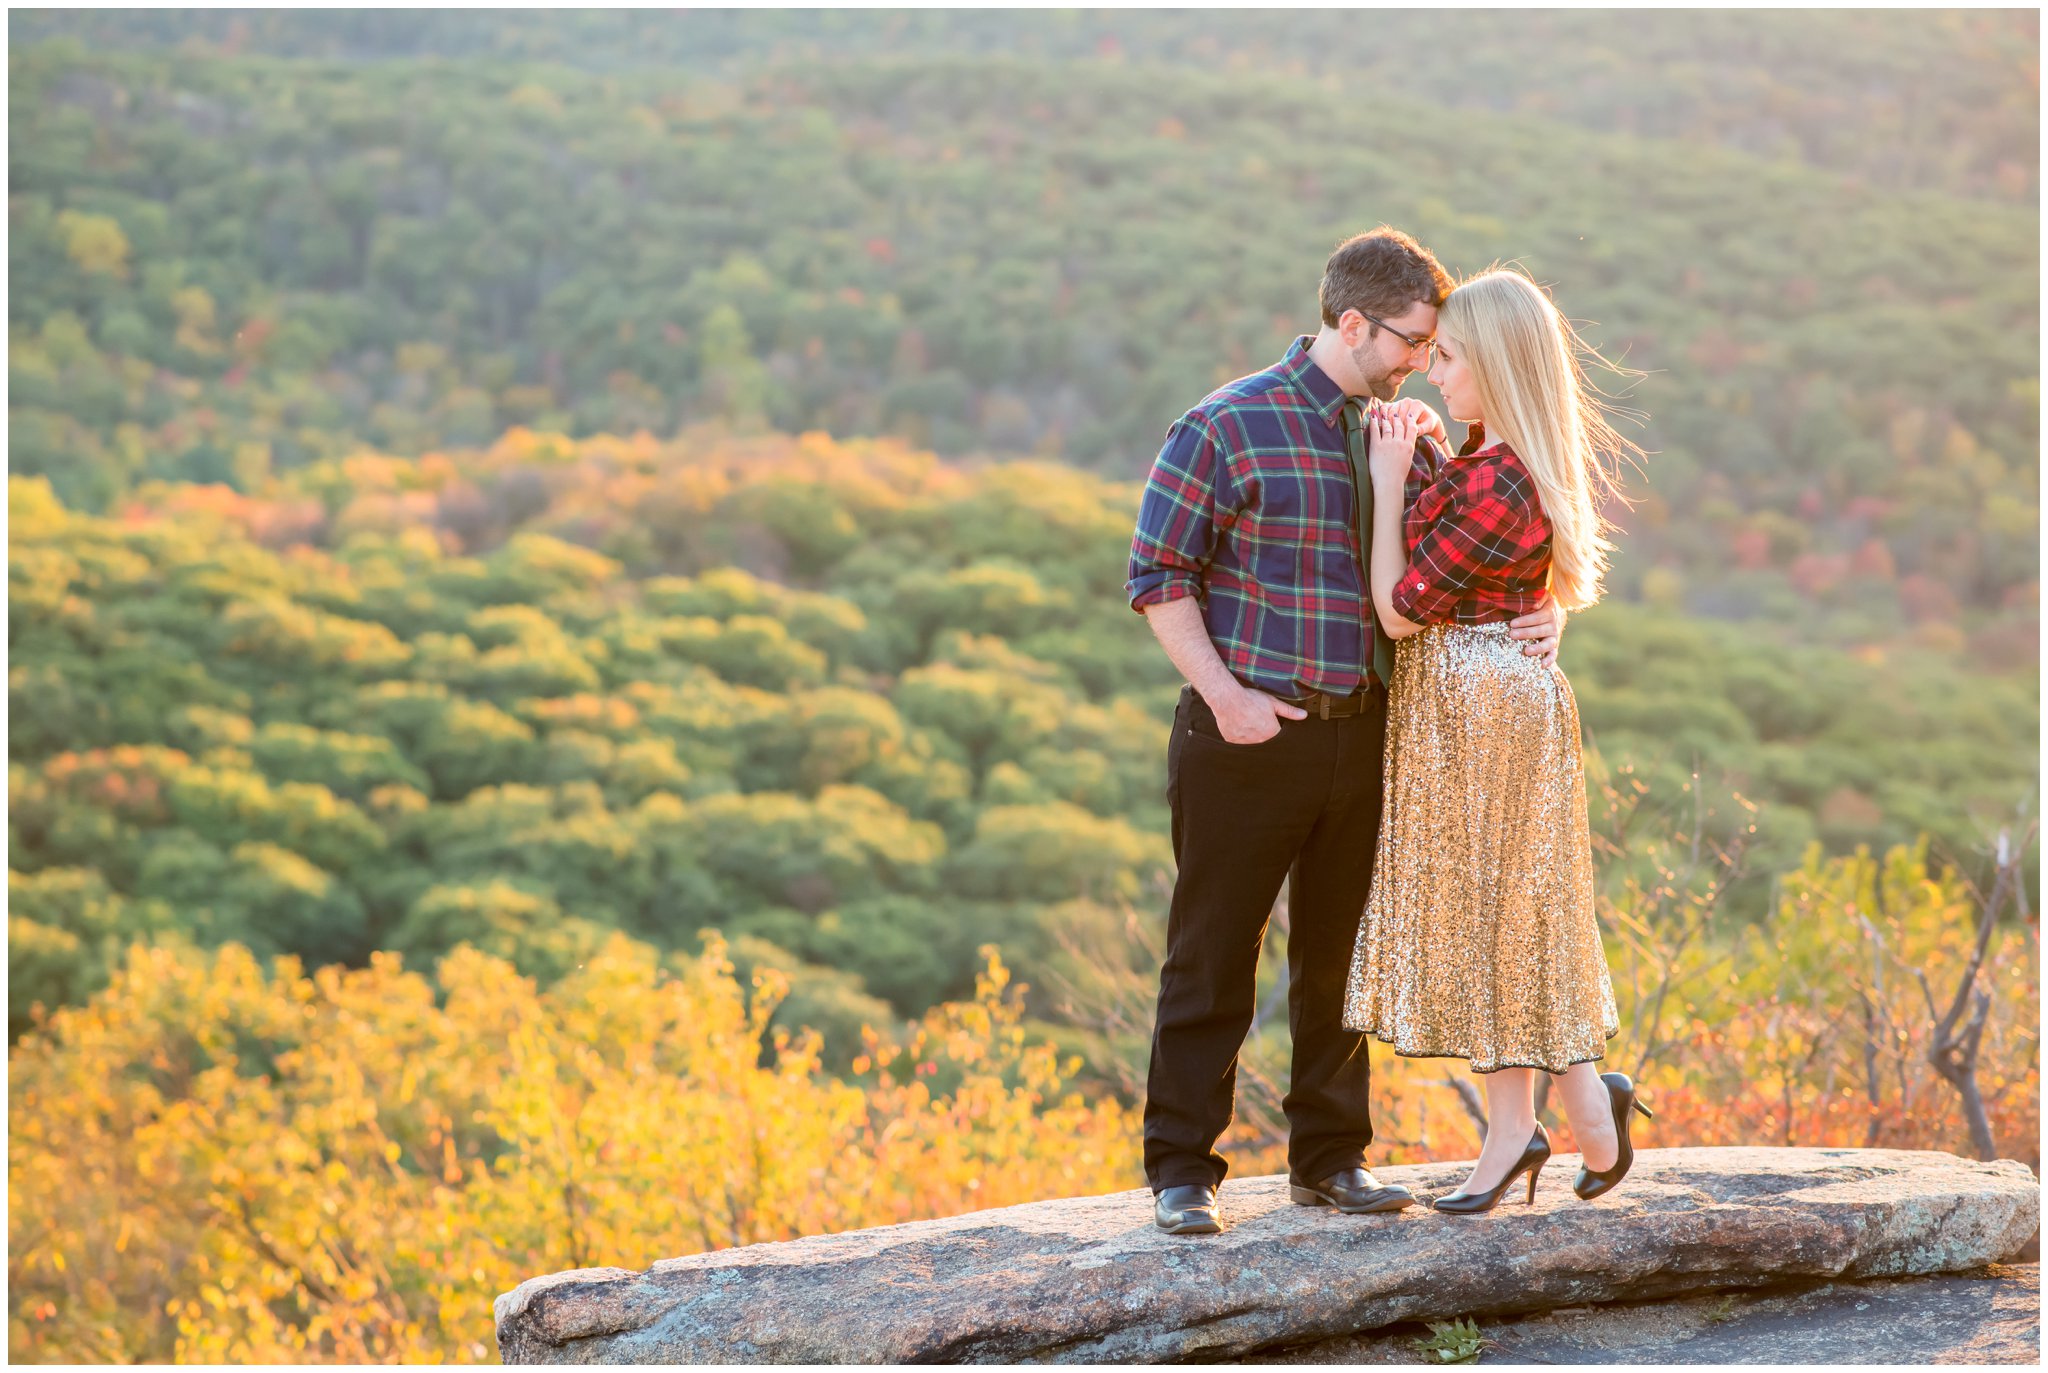 Laura Lee Photography_ Best of 2015 Engagements_0030